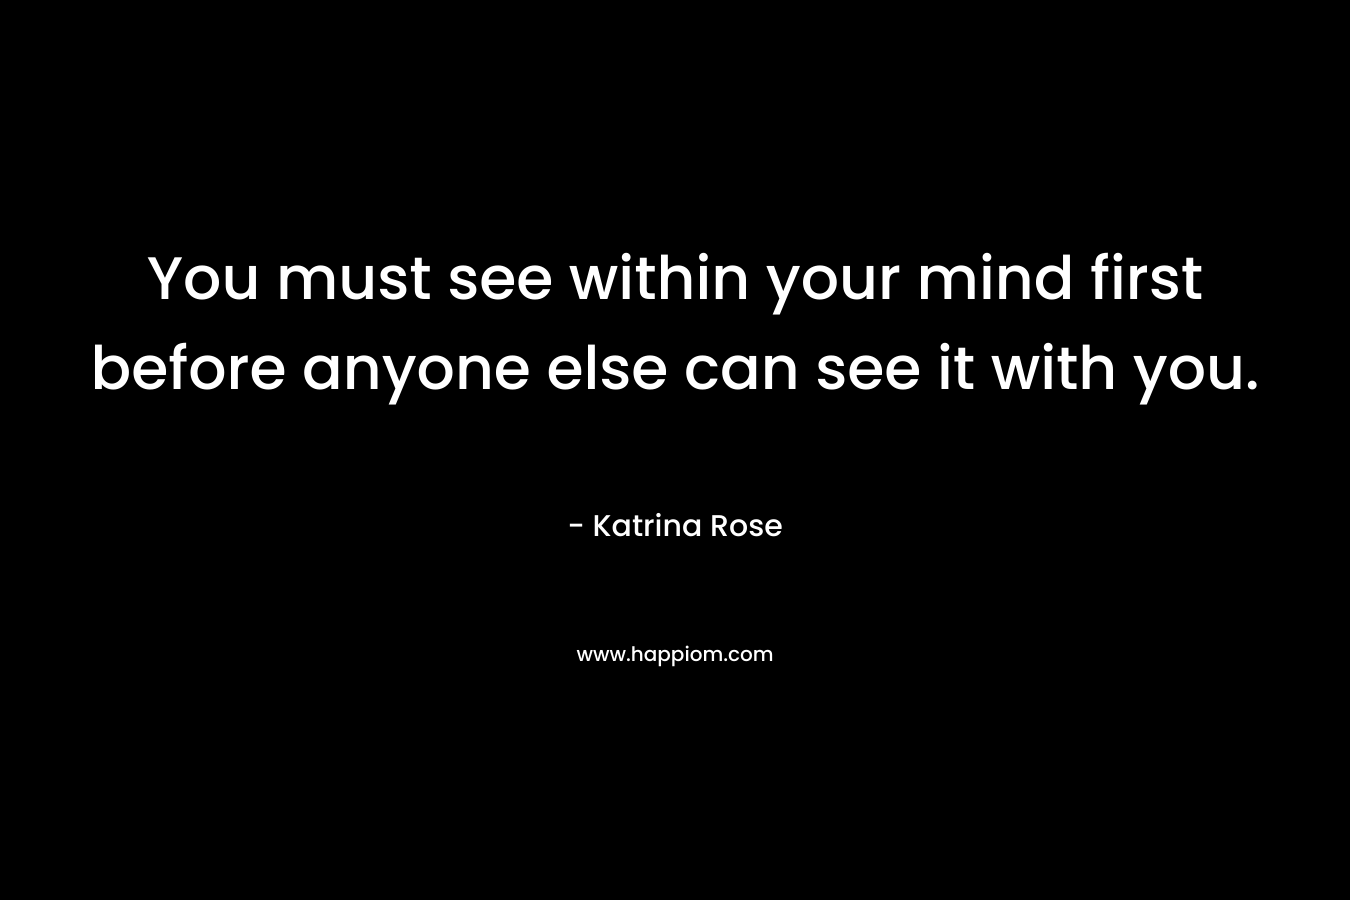 You must see within your mind first before anyone else can see it with you.